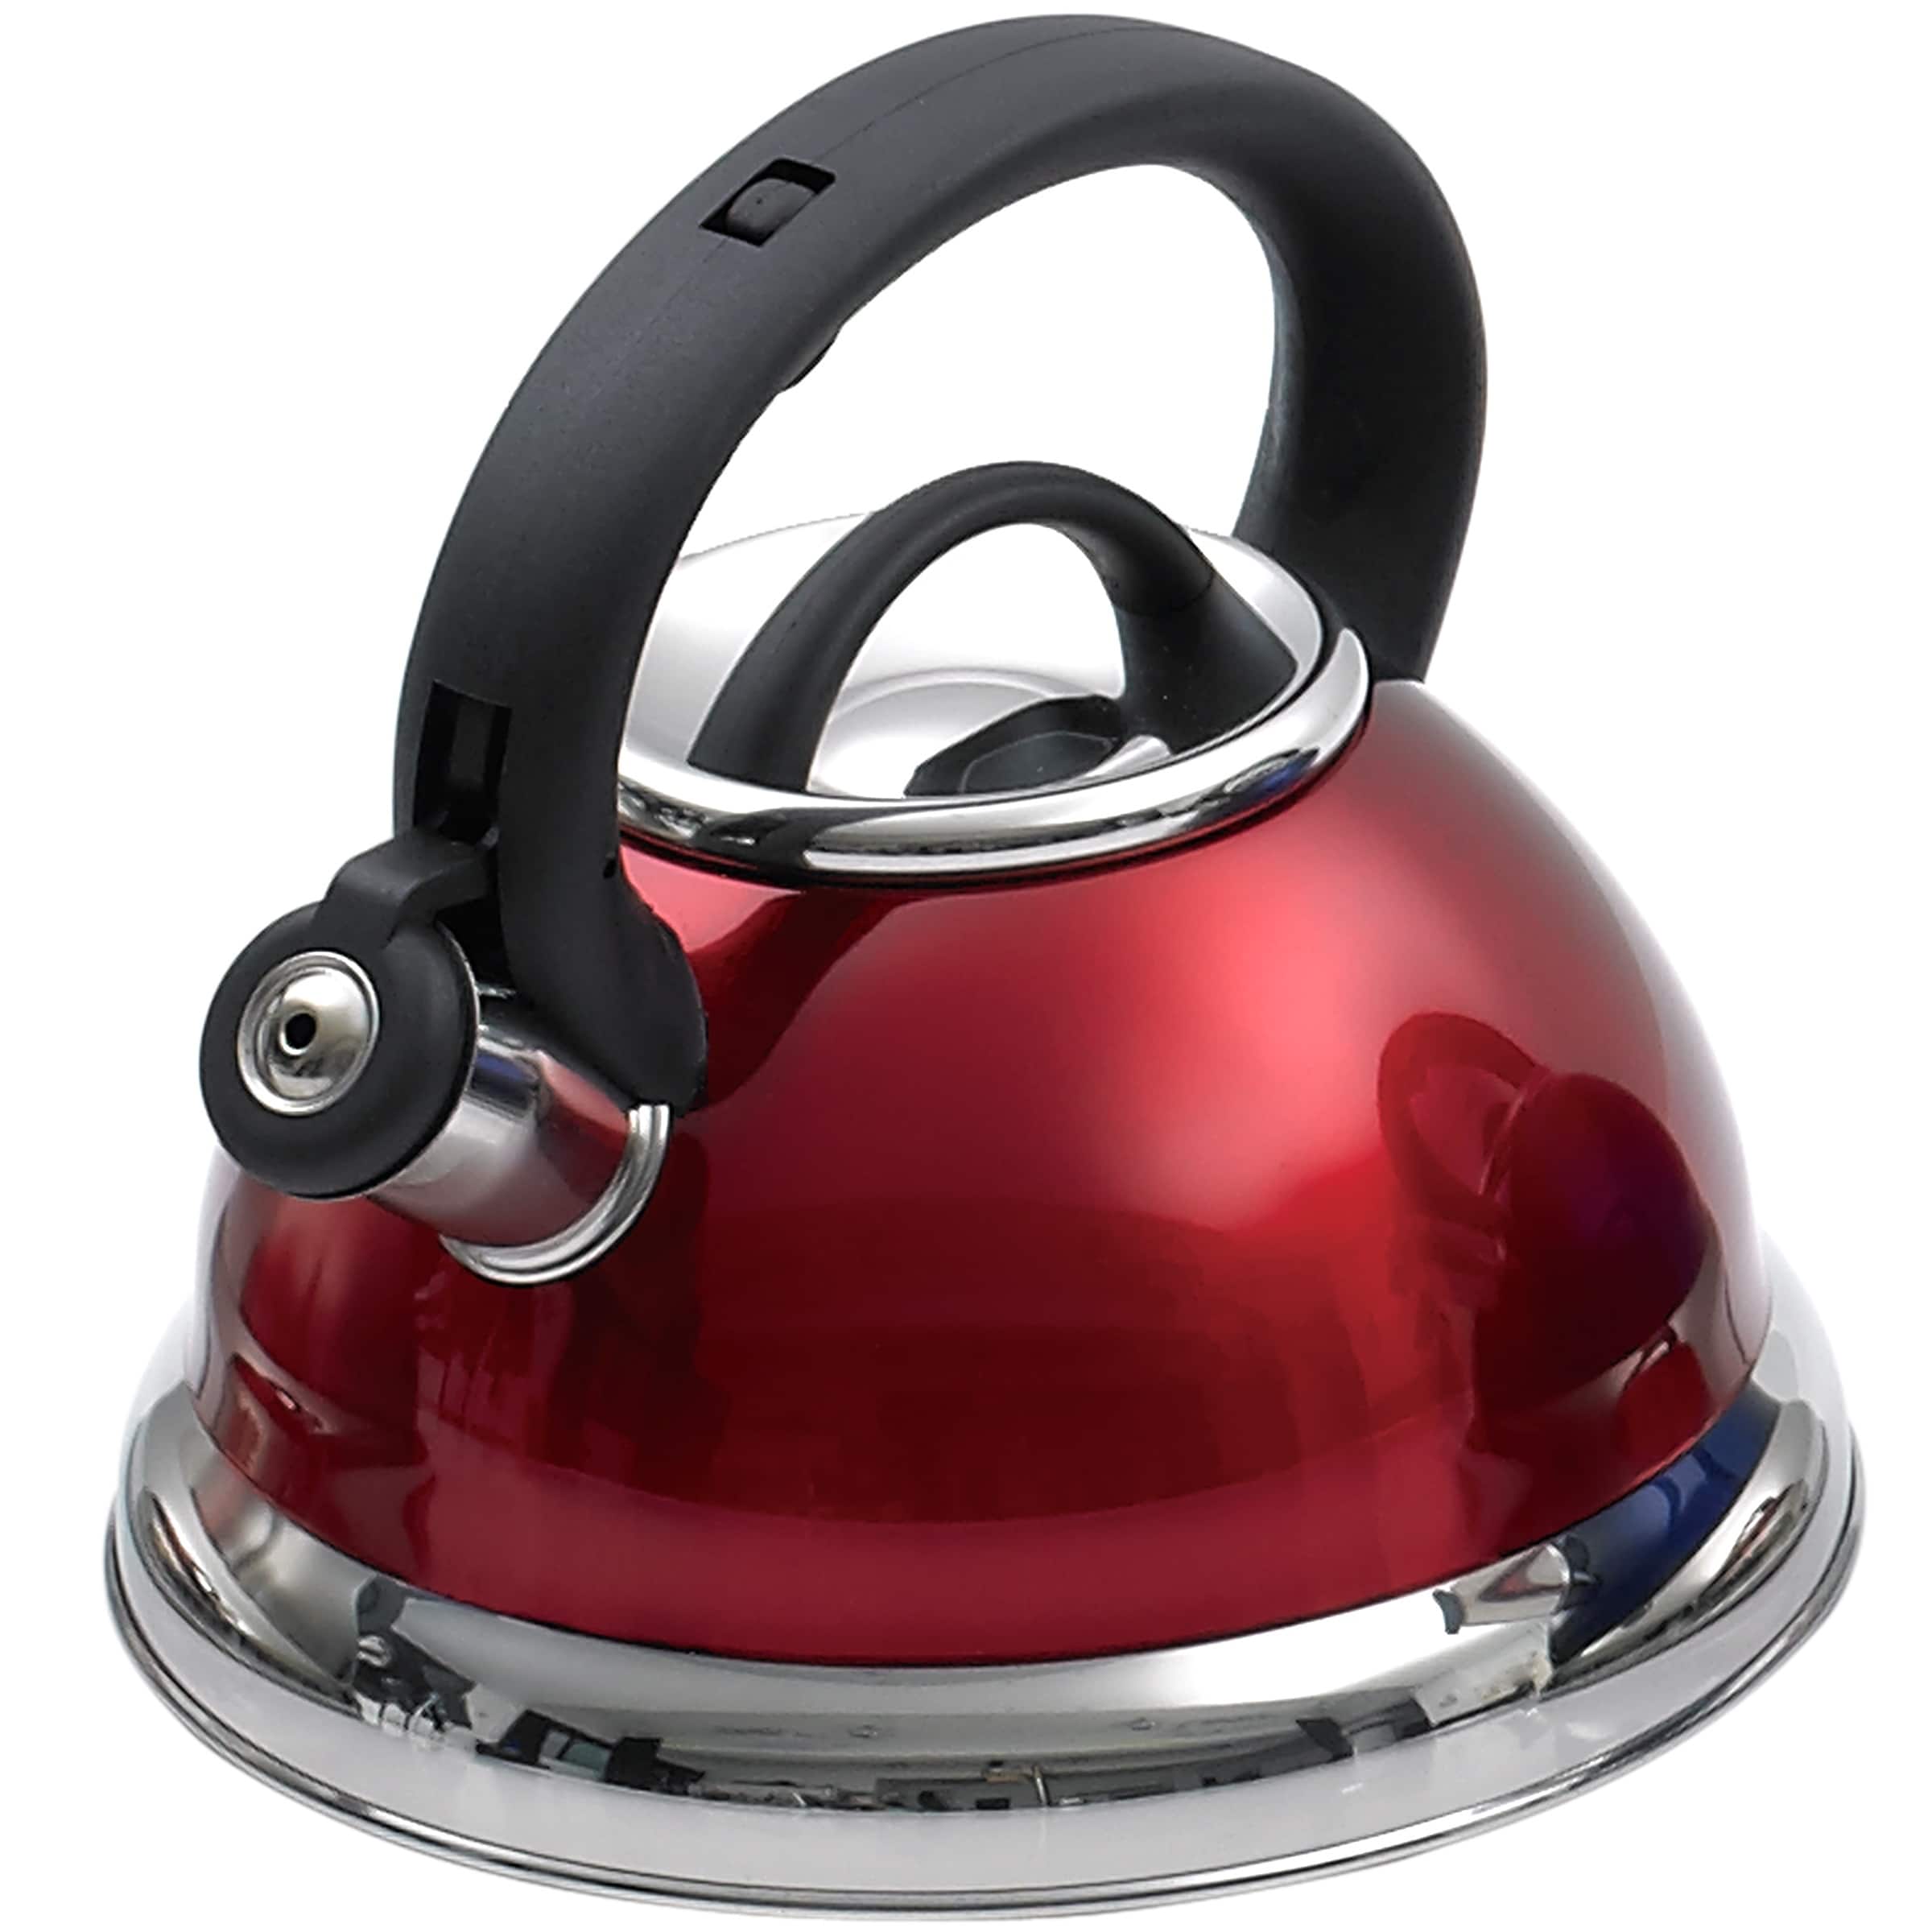 https://ak1.ostkcdn.com/images/products/10669180/Creative-Home-Alexa-3.0-Quart-Stainless-Steel-Whistling-Tea-Kettle-with-Aluminum-Capsulated-Bottom-Metallic-Cranberry-496ca756-a6eb-42dd-985b-98b343927366.jpg